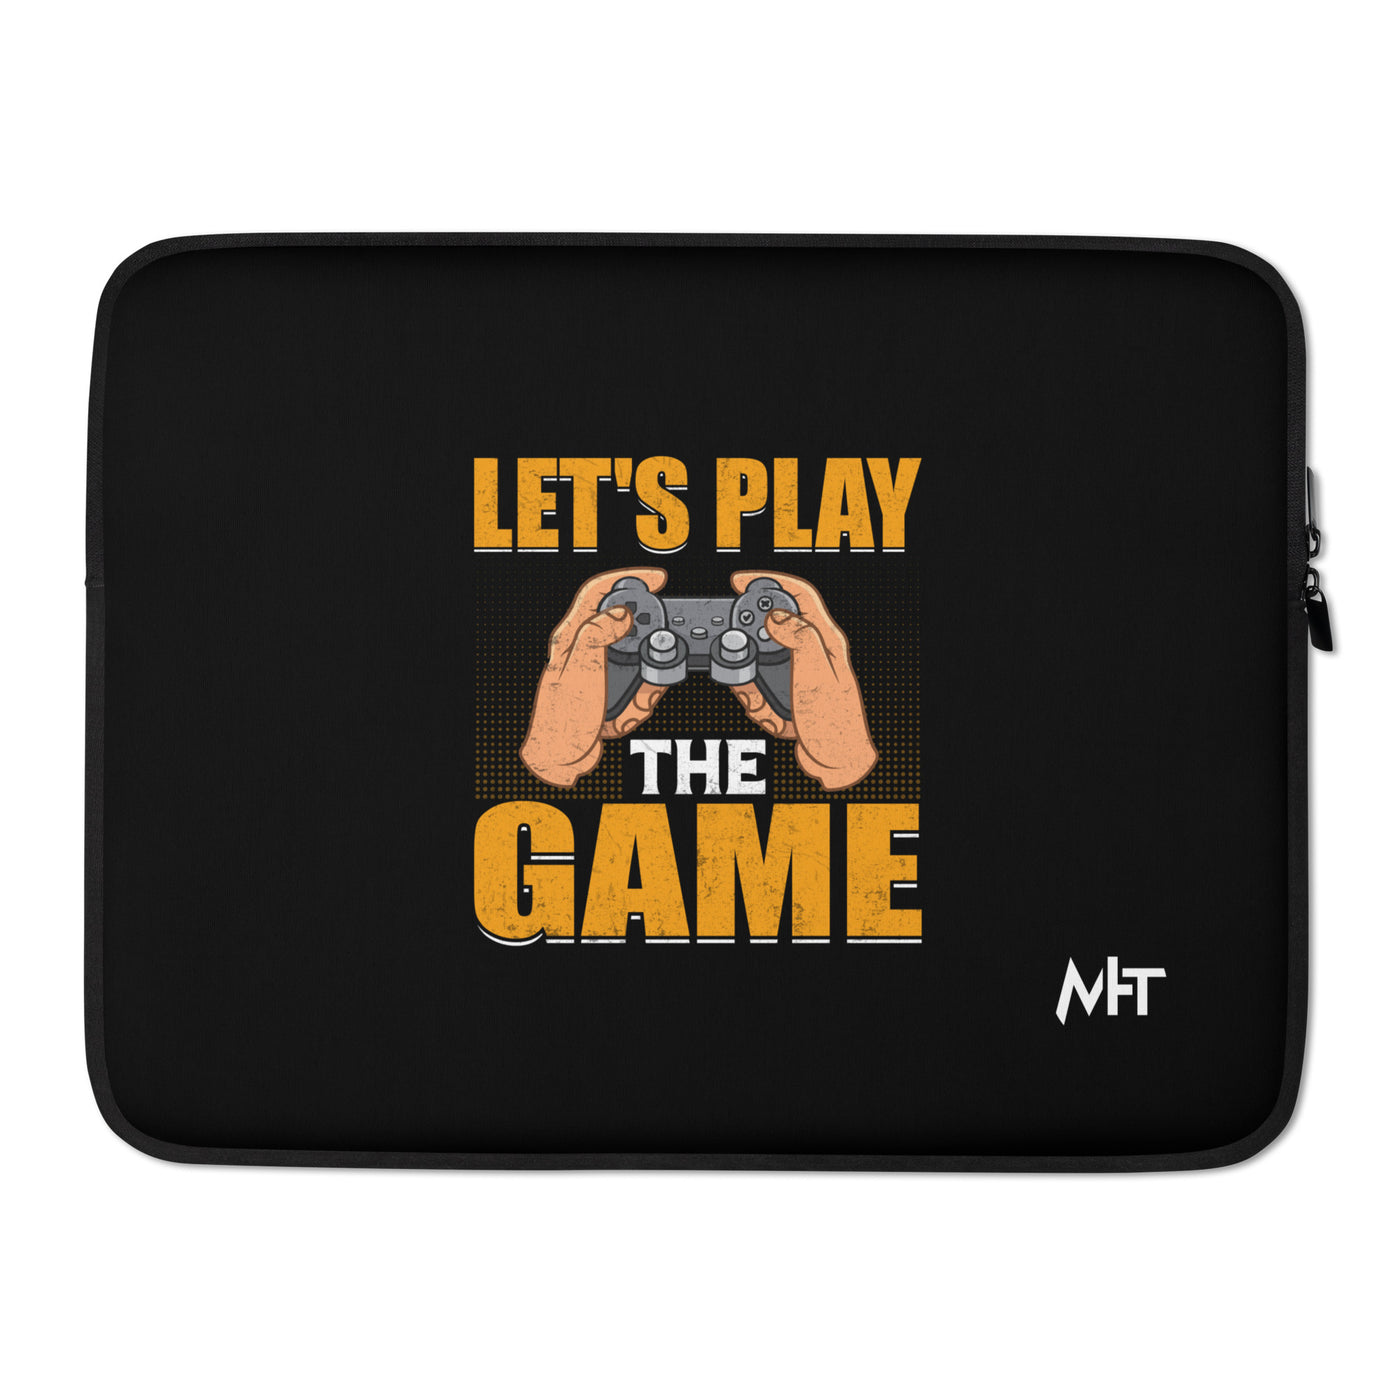 Let's Play the Game - Laptop Sleeve